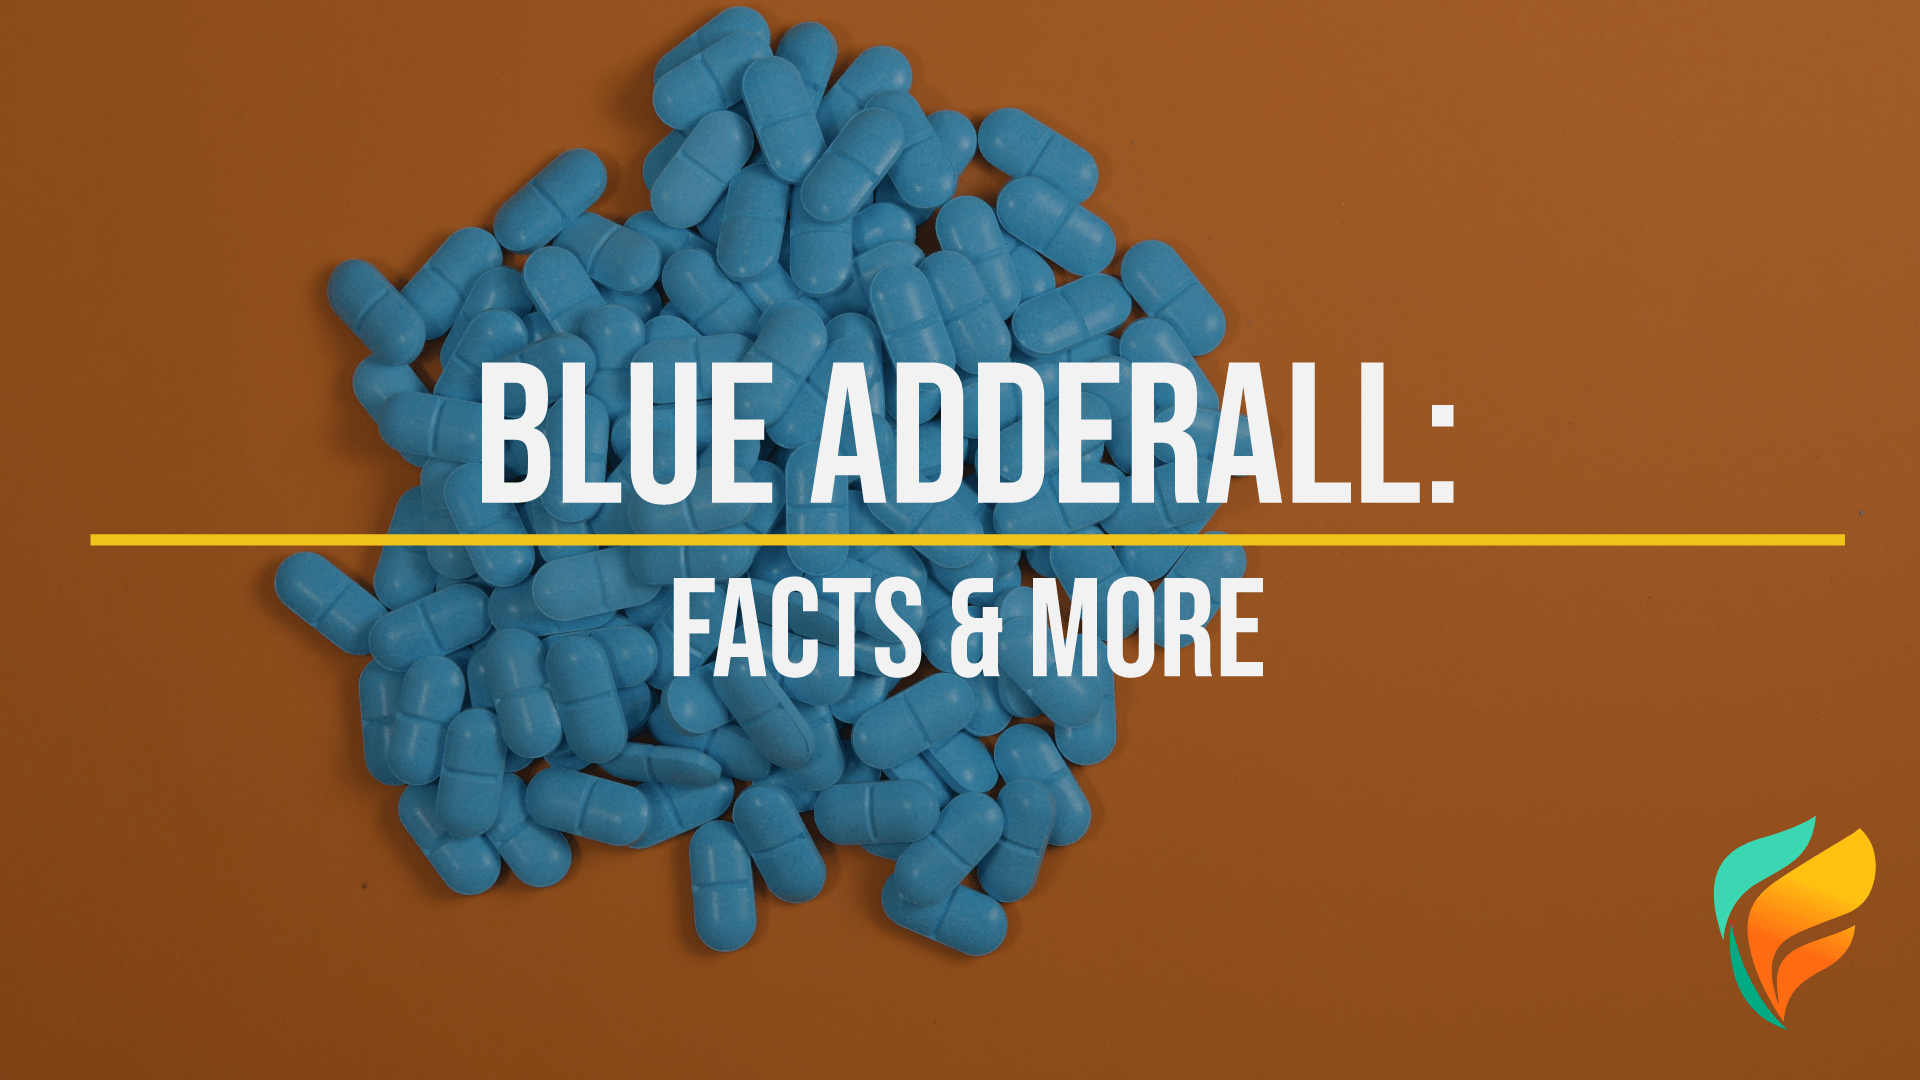 Modafinil Vs Adderall: Which Enhances Cognitive Function Better